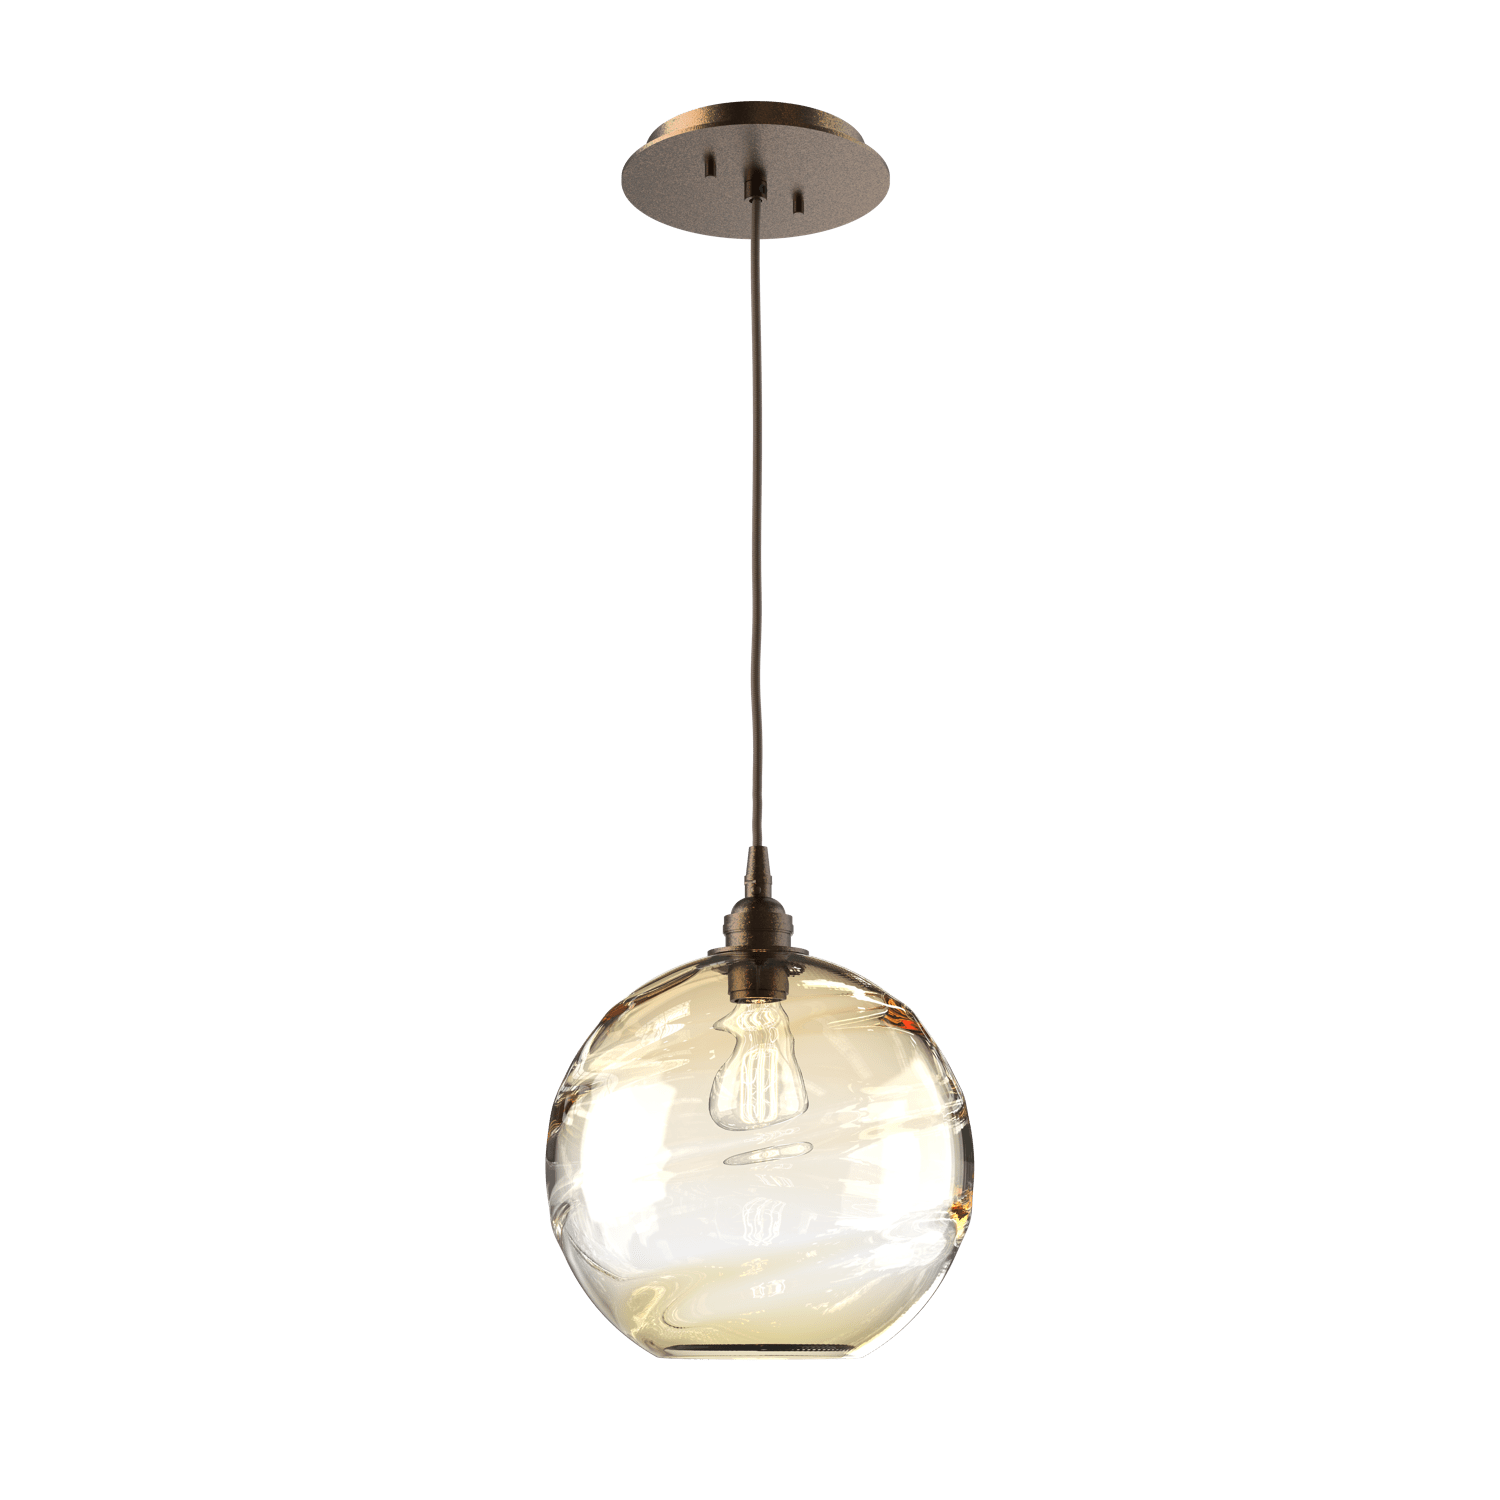 LAB0047-01-FB-OA-Hammerton-Studio-Optic-Blown-Glass-Terra-pendant-light-with-flat-bronze-finish-and-optic-amber-blown-glass-shades-and-incandescent-lamping